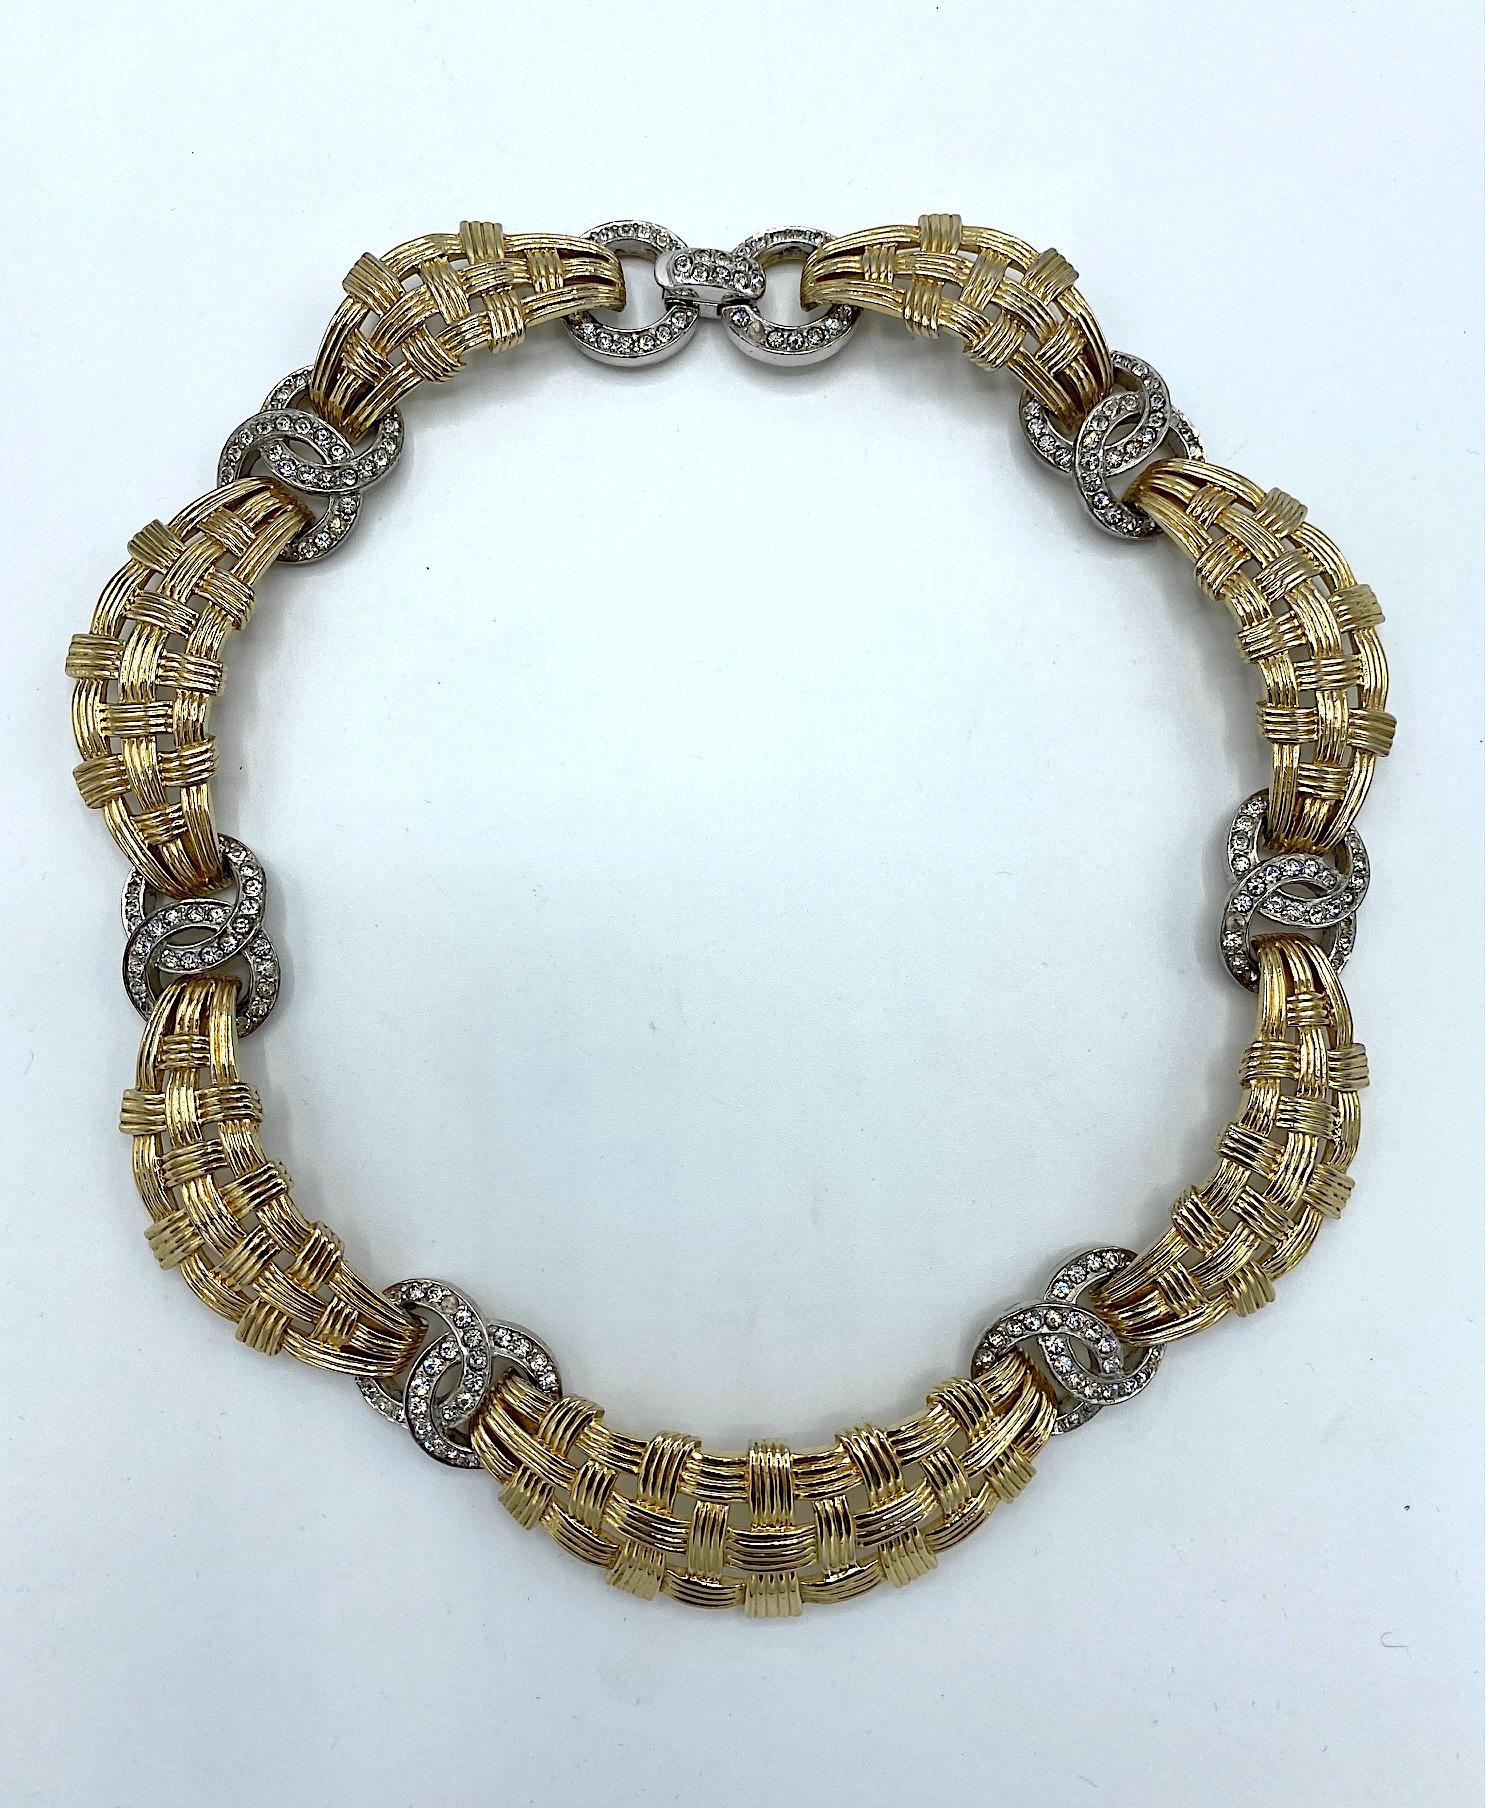 A beautiful and classic vintage 1950s basket weave link necklace with rhinestone ring accents by Marcel Boucher. Seven curved and lightly domed links are cast with an interlocking open basket weave design. Connecting the gold basket links are six